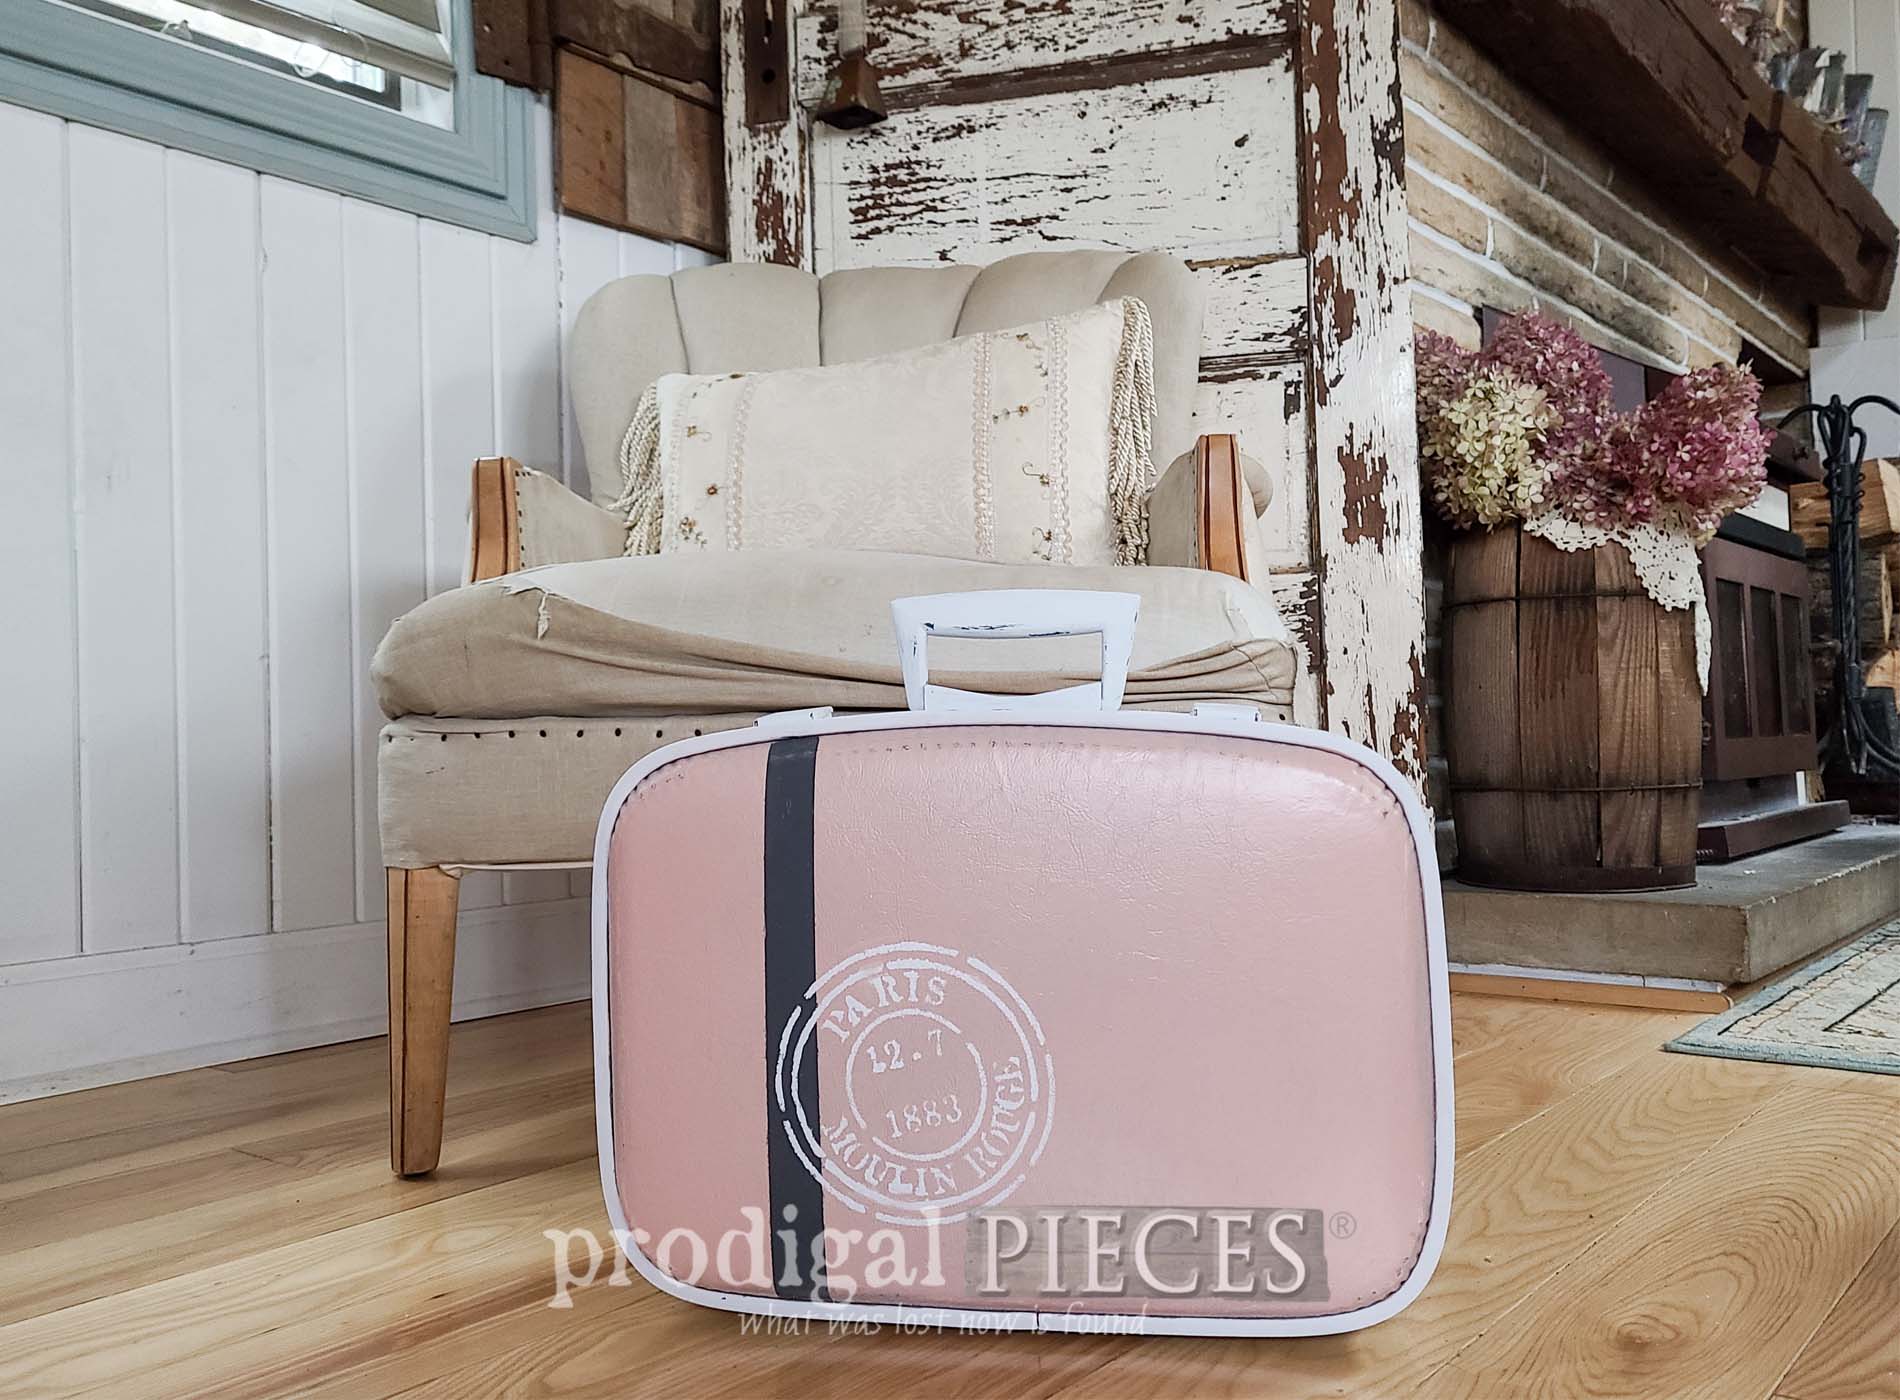 Featured Vintage Suitcase Upcycled by Larissa of Prodigal Pieces | prodigalpieces.com #prodigalpieces